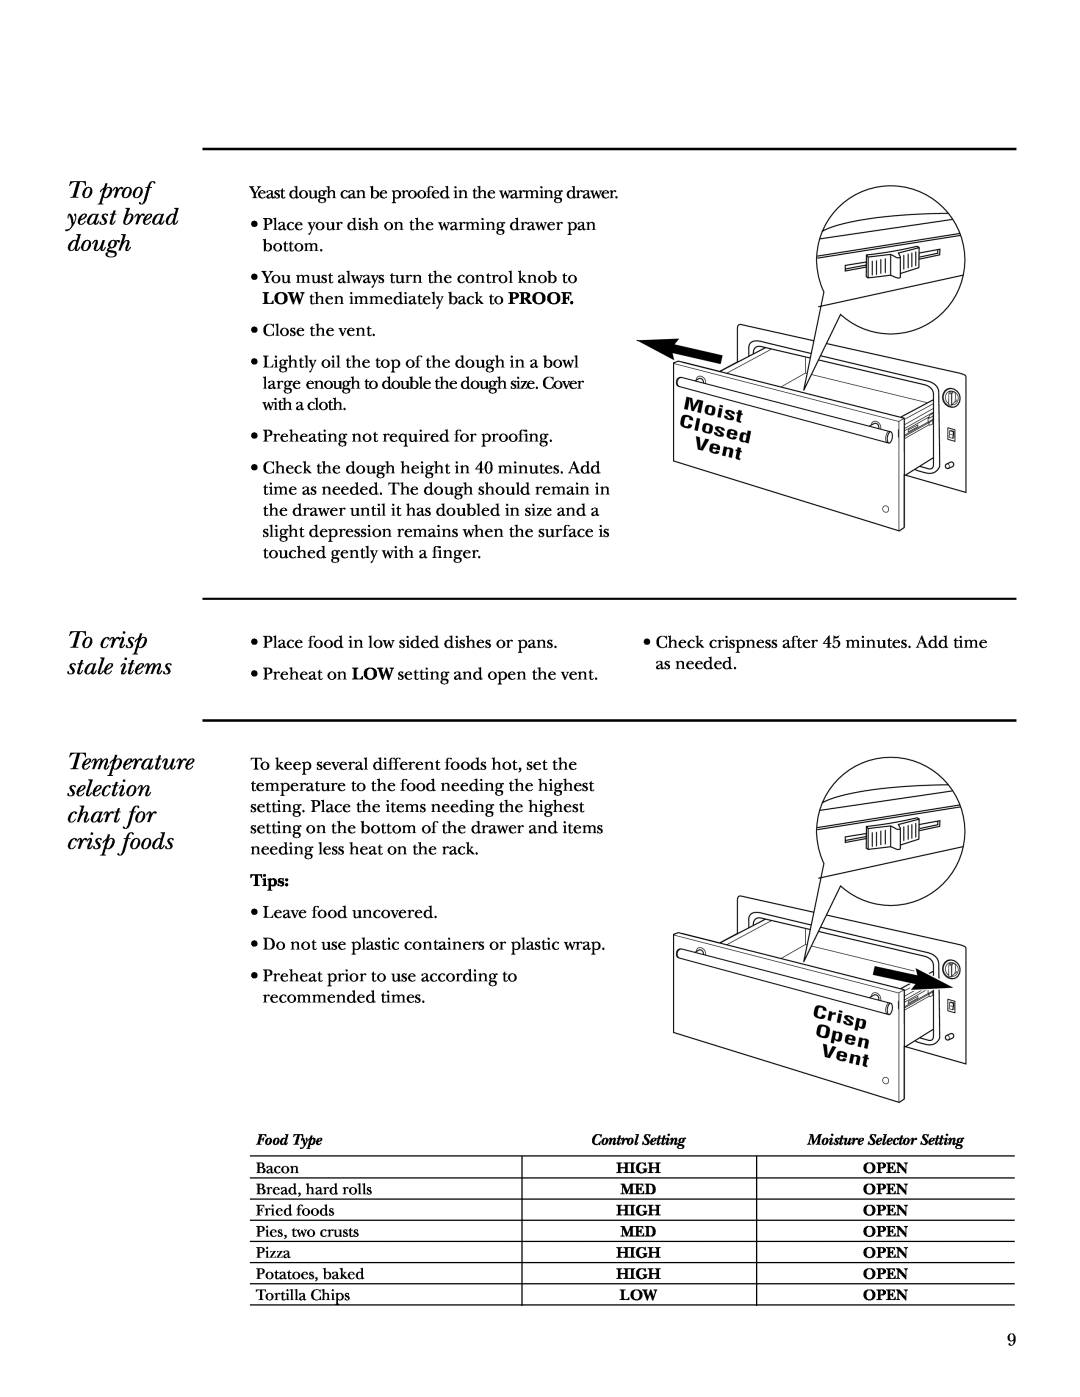 GE ZTD910 owner manual To proof yeast bread dough, To crisp stale items, Temperature selection chart for crisp foods 